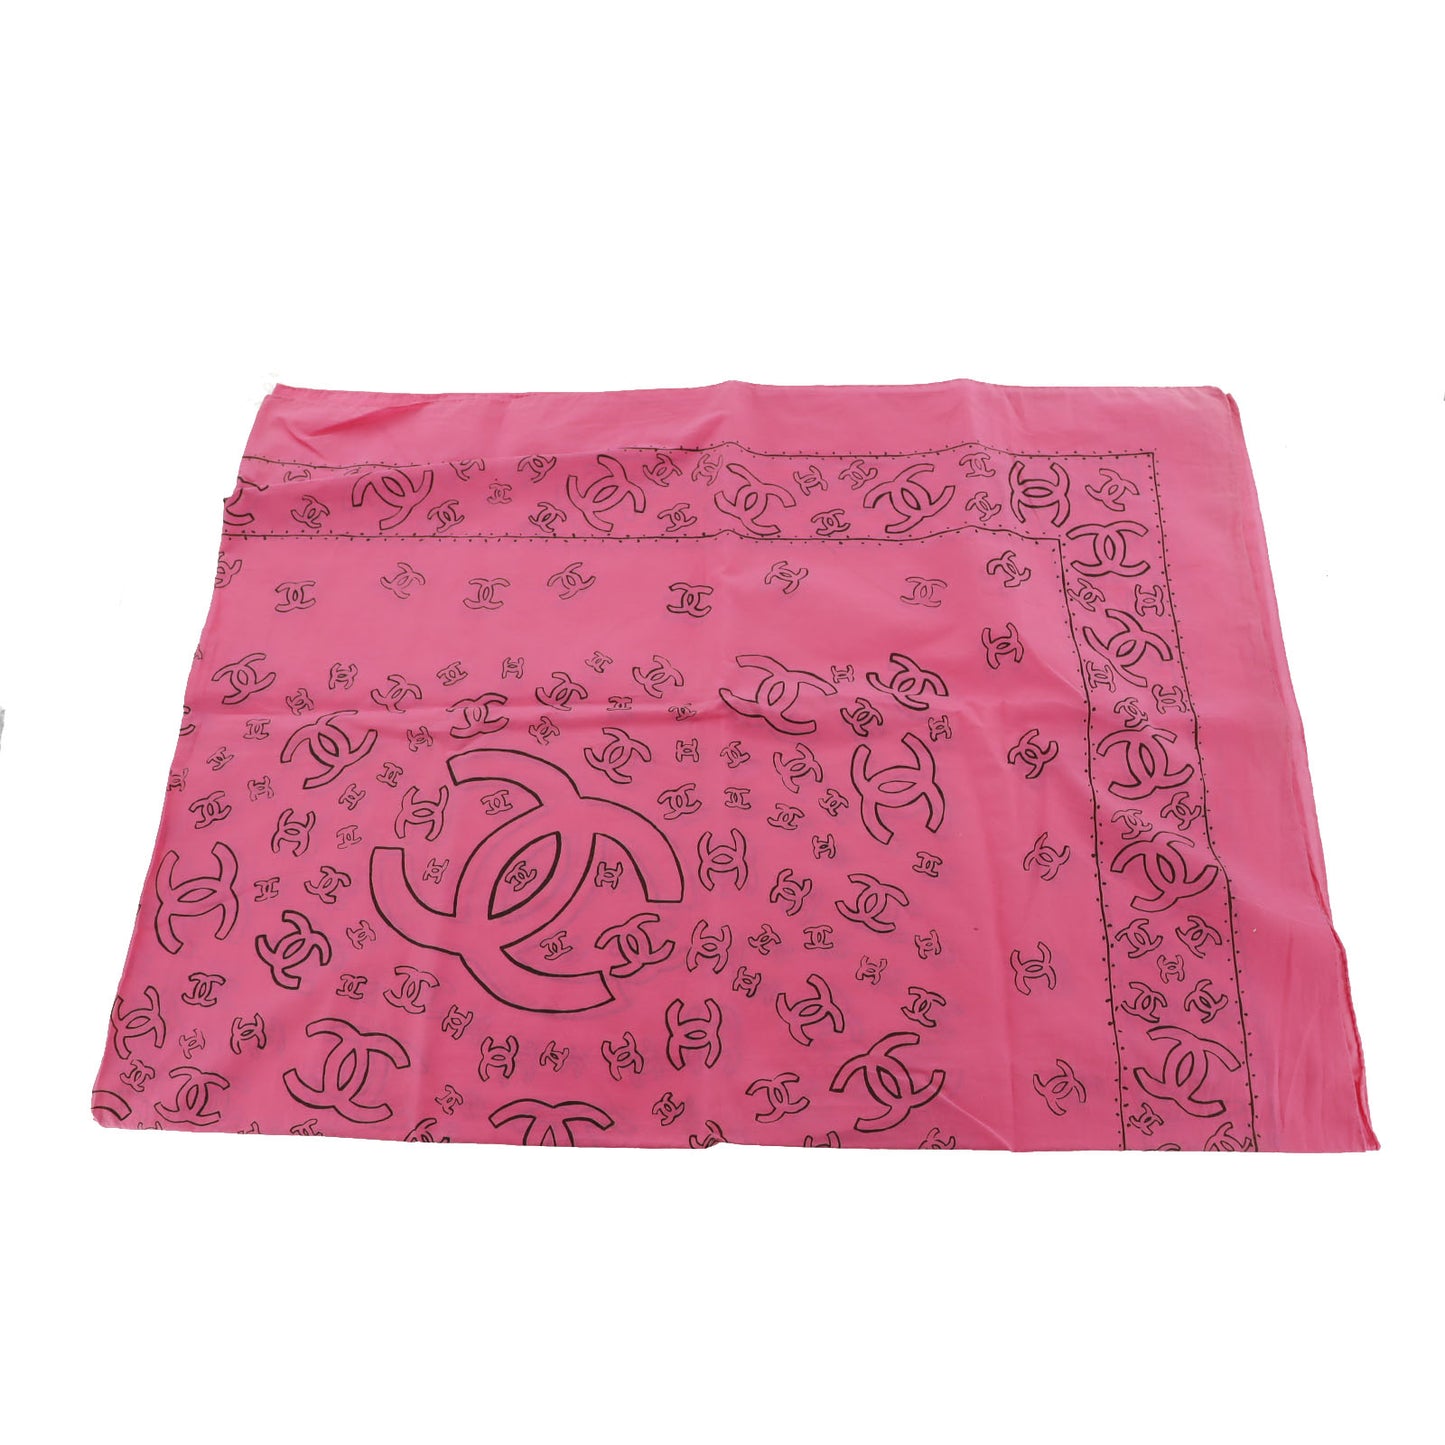 CHANEL CC Logos Pink Used Large Scarf Cotton #AH585 S